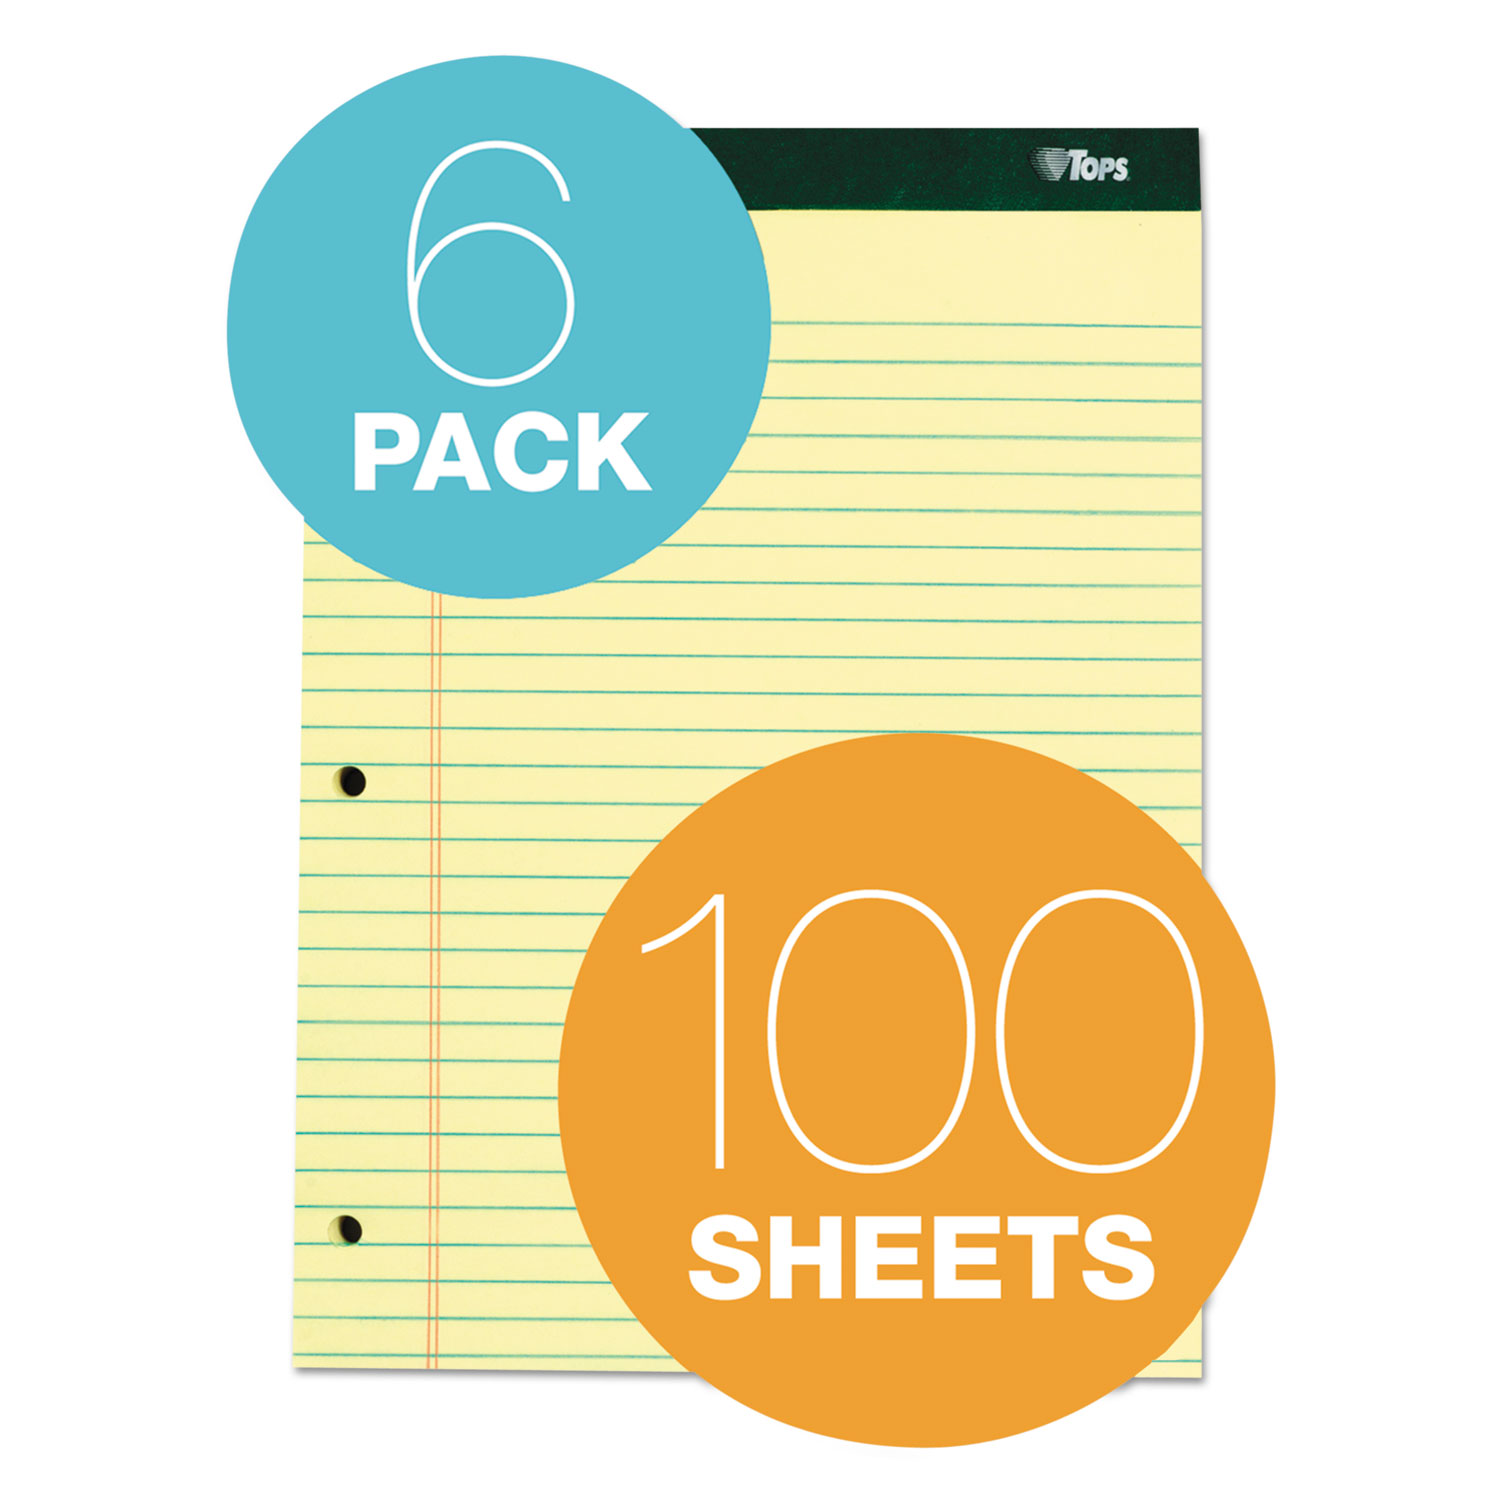 Double Docket Ruled Pads, 8 1/2 x 11 3/4, Canary, 100 Sheets, 6 Pads/Pack